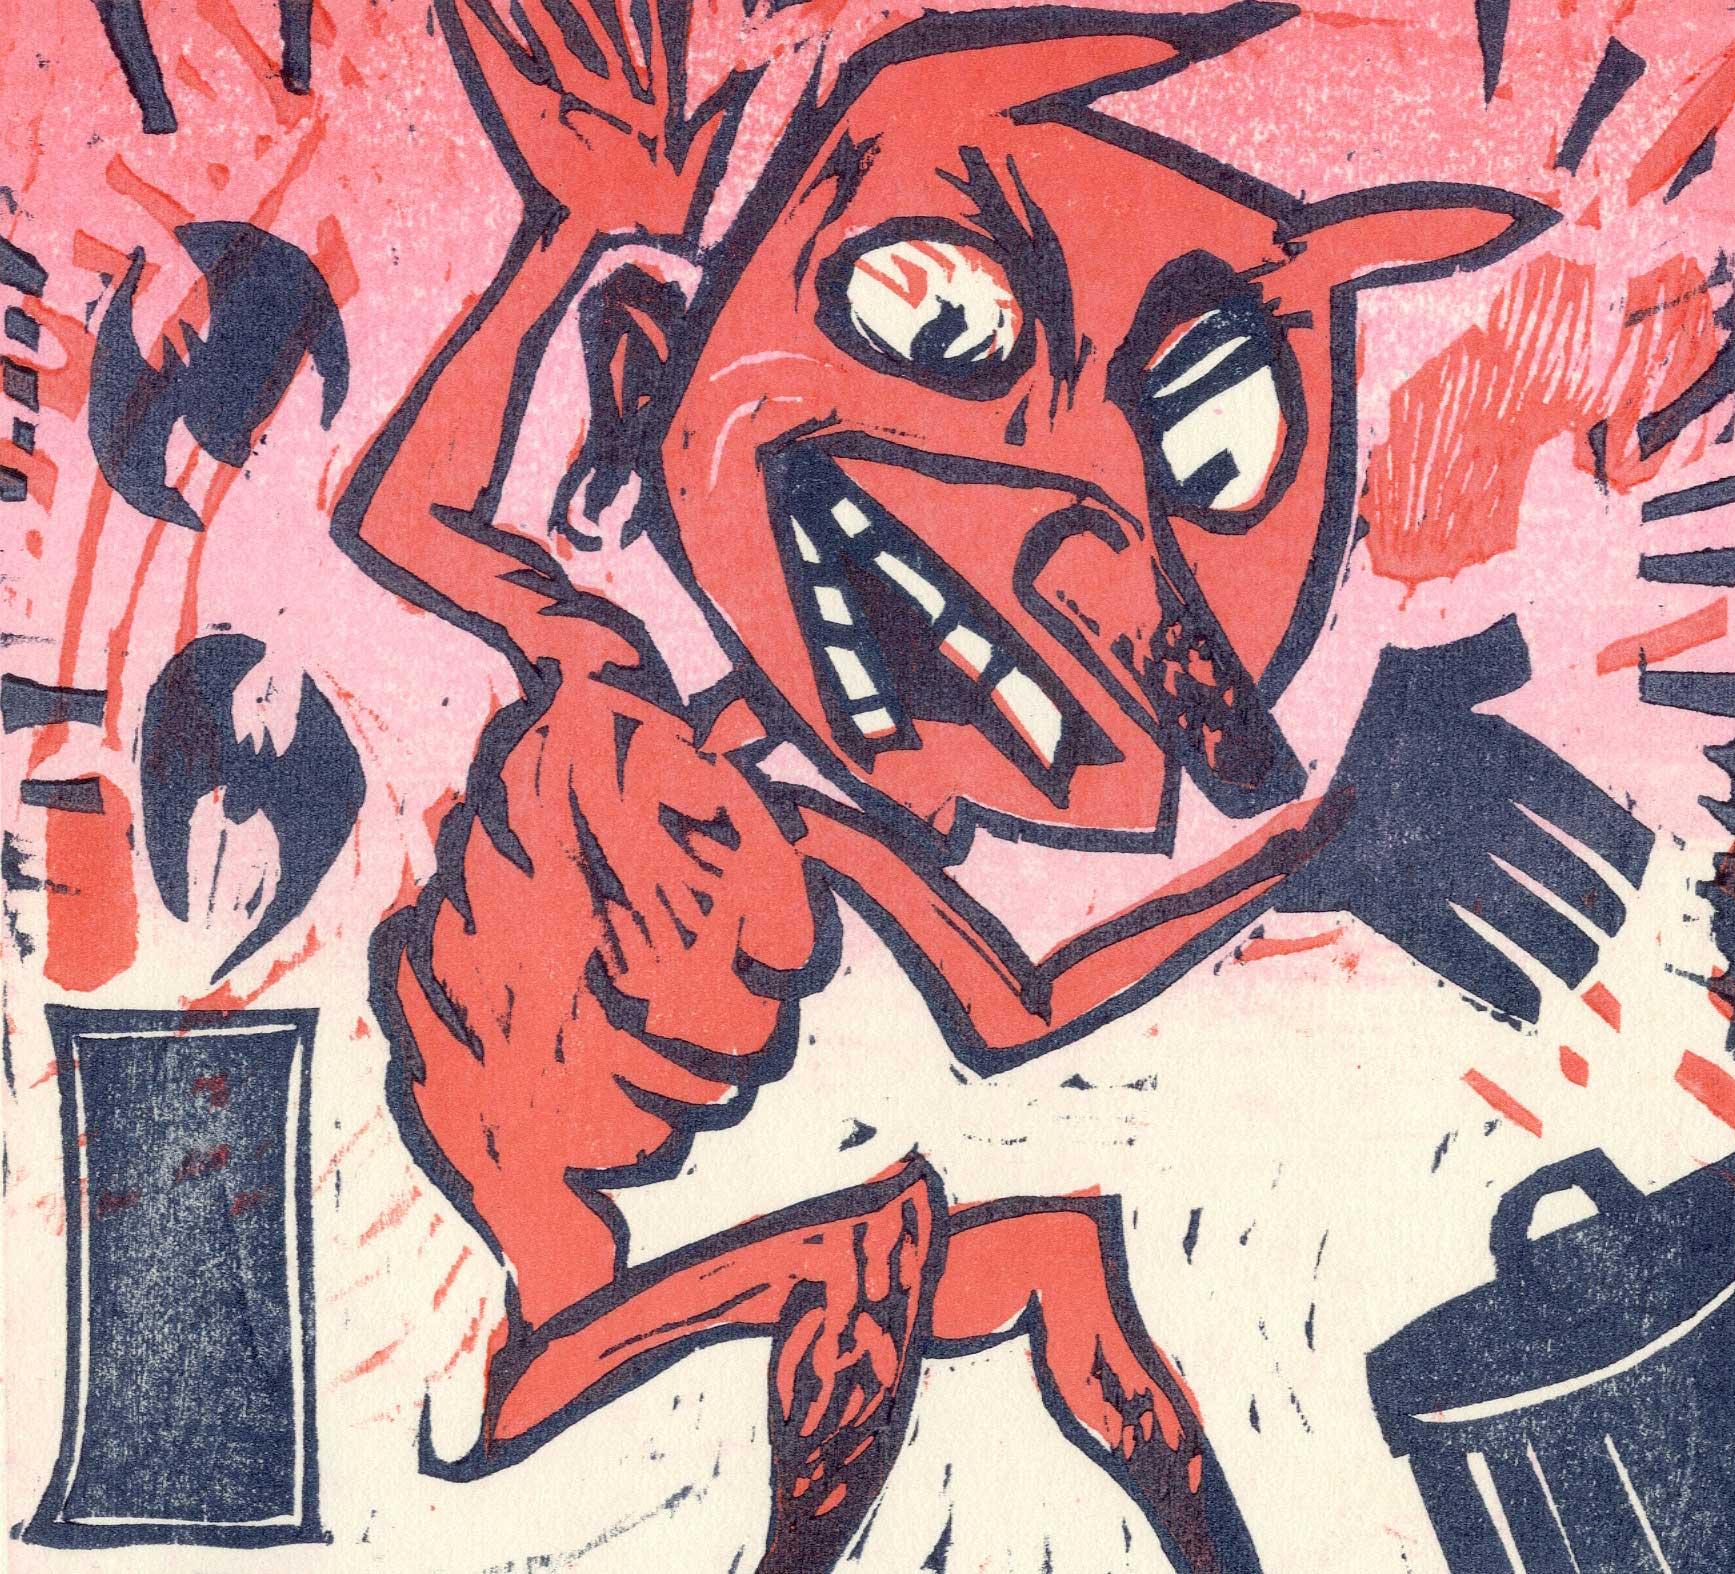 Man Fell Down in Fright and Devil Stomped on his Back - Print by Donna Evans